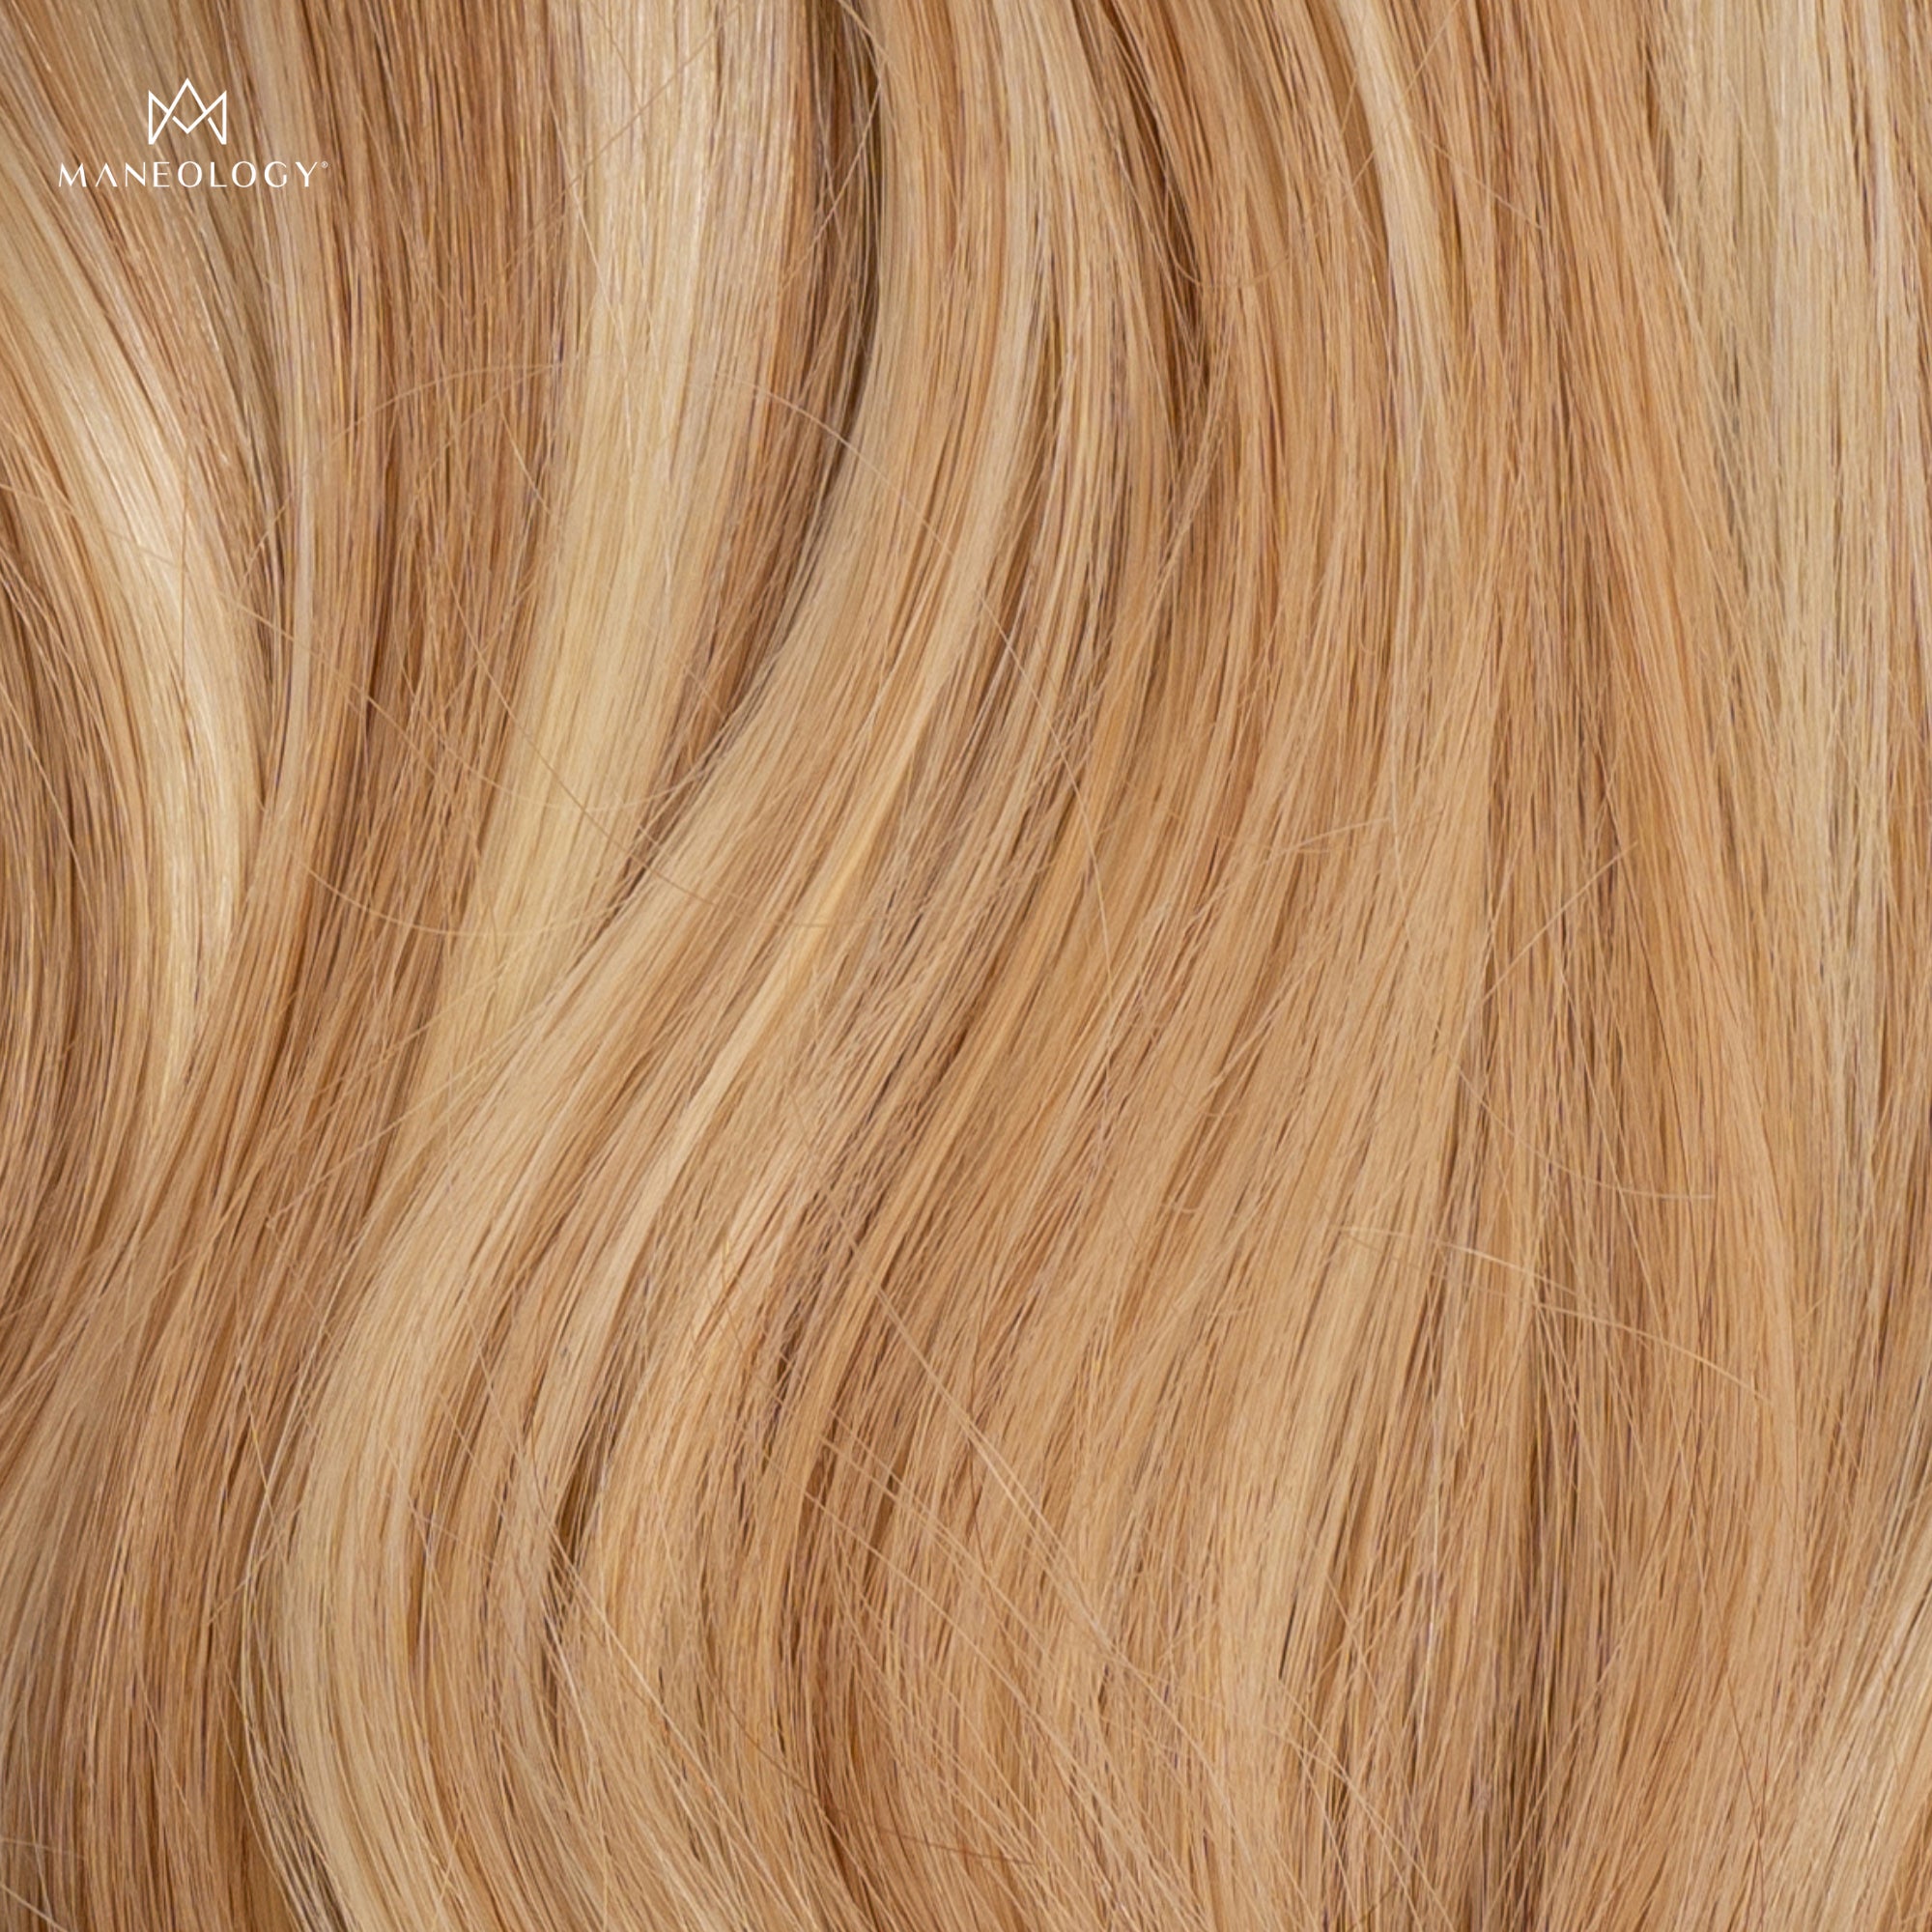 Duchess Elegant Clip-in Hair Extensions 16"Colour P27 613 - Maneology Hair Extensions